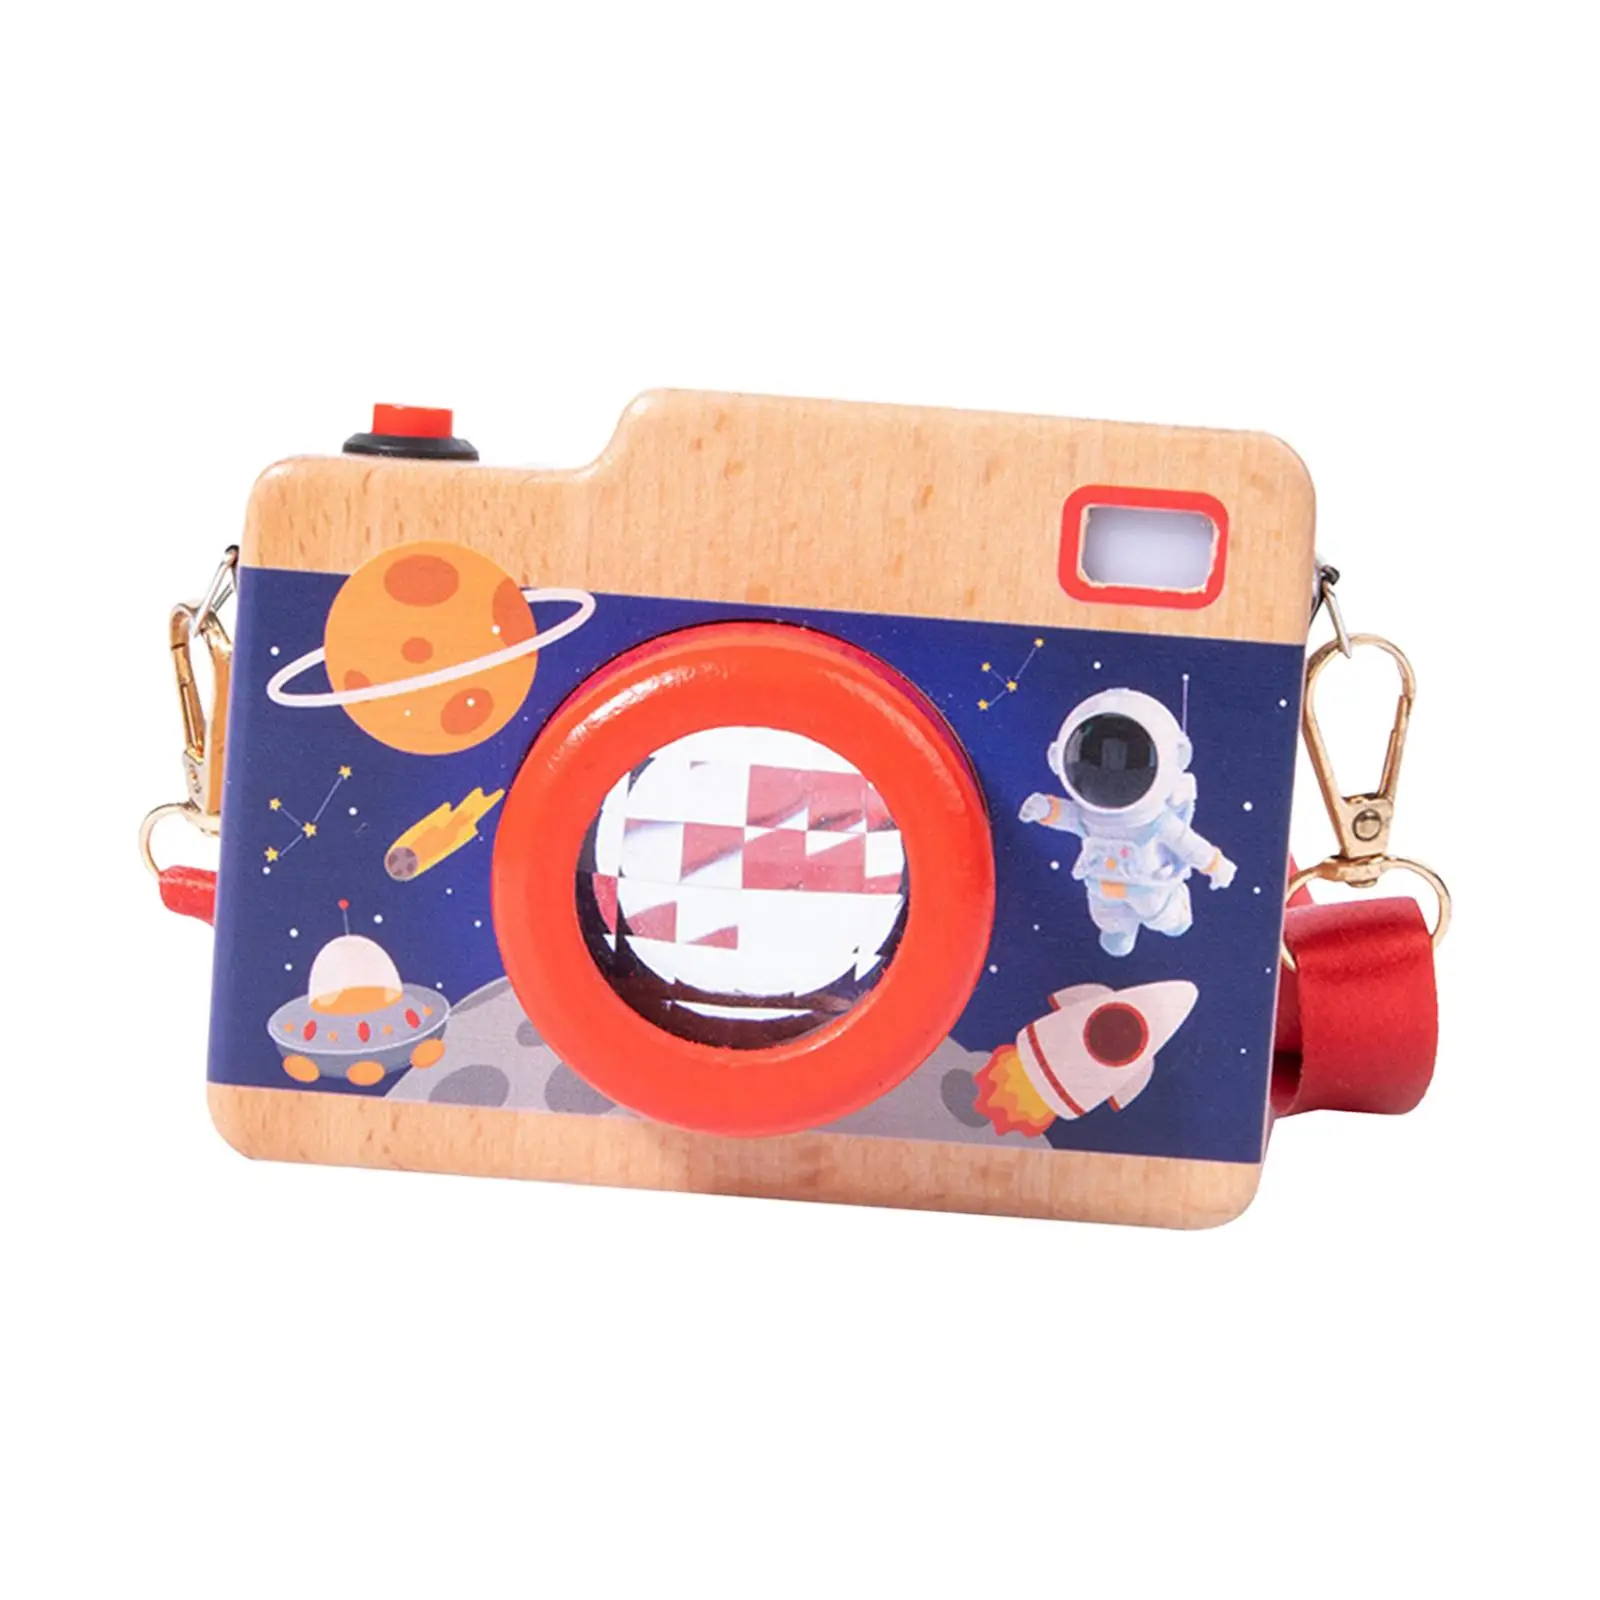 Simulation Wood Camera Handicraft Creative Fashion Clothing Accessory for Birthday Photographed Props Gift Preschool Party Toy